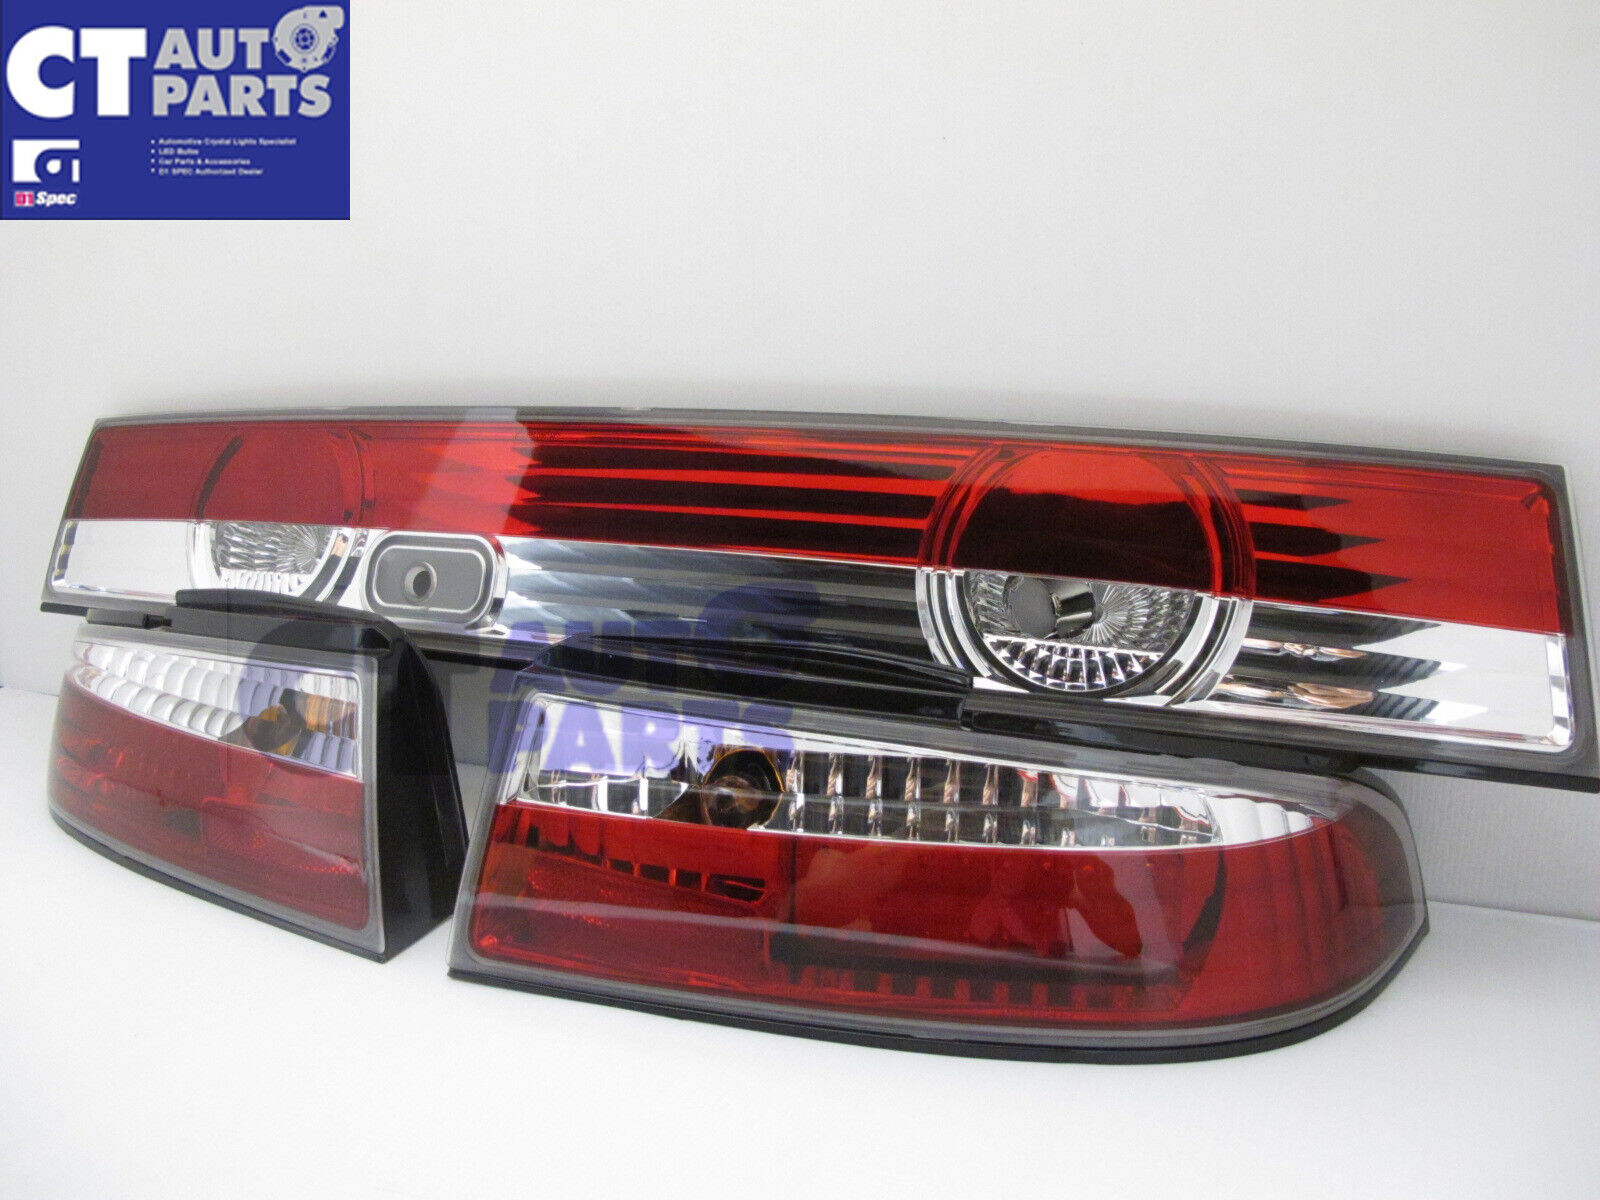 Clear Red LED Tail lights & Clear Garnish for 93-98 NISSAN SILVIA S14 200SX 